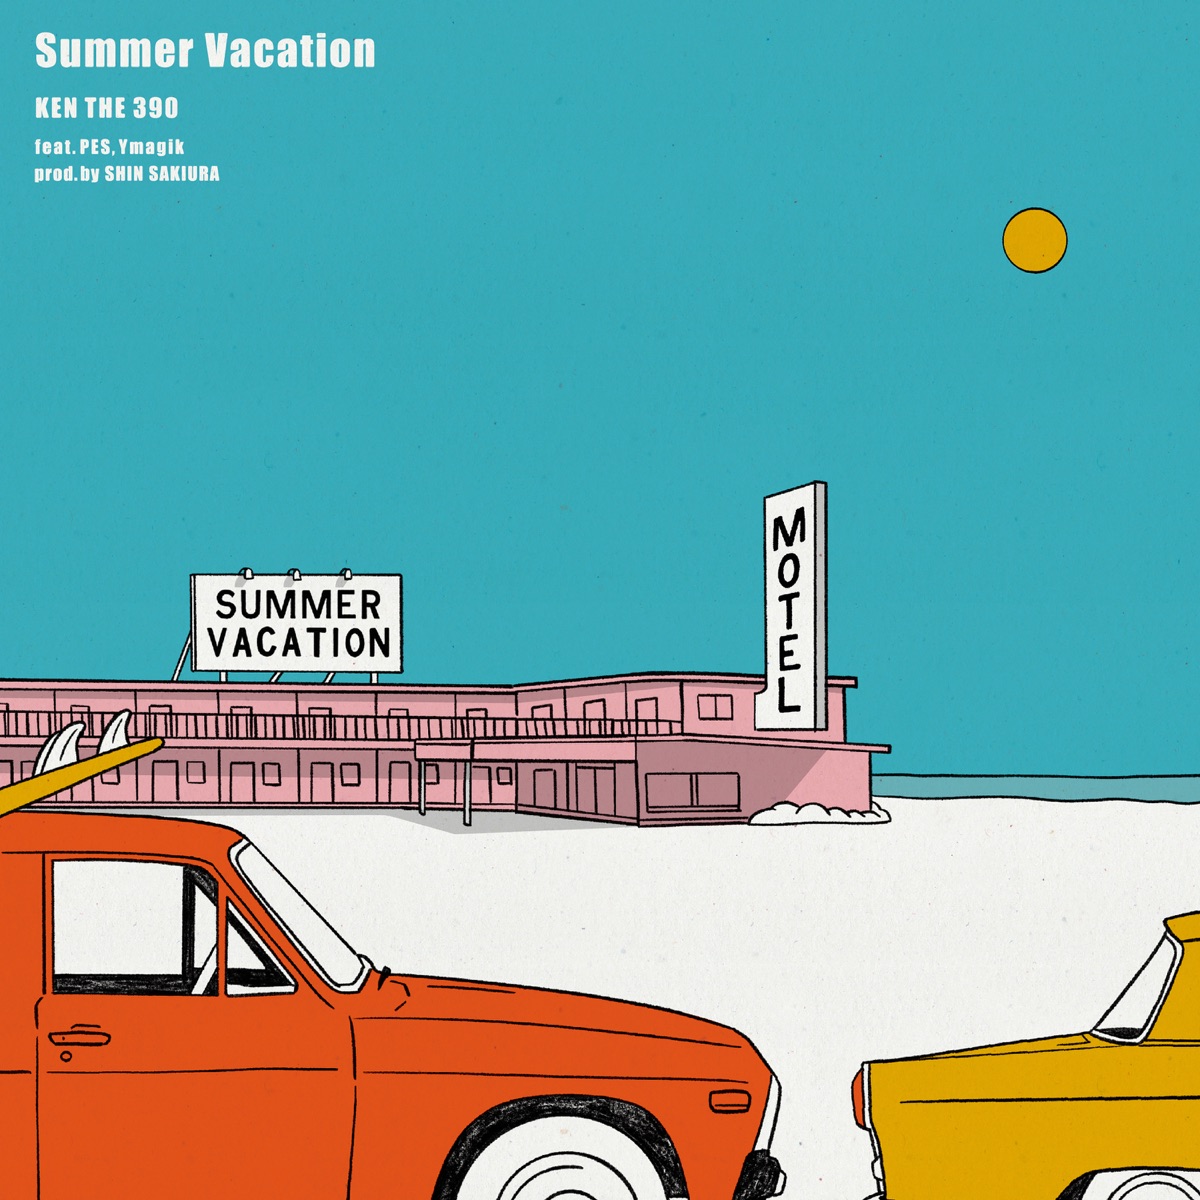 『KEN THE 390 - Summer Vacation feat. PES, Ymagik』収録の『Summer Vacation feat. PES, Ymagik』ジャケット